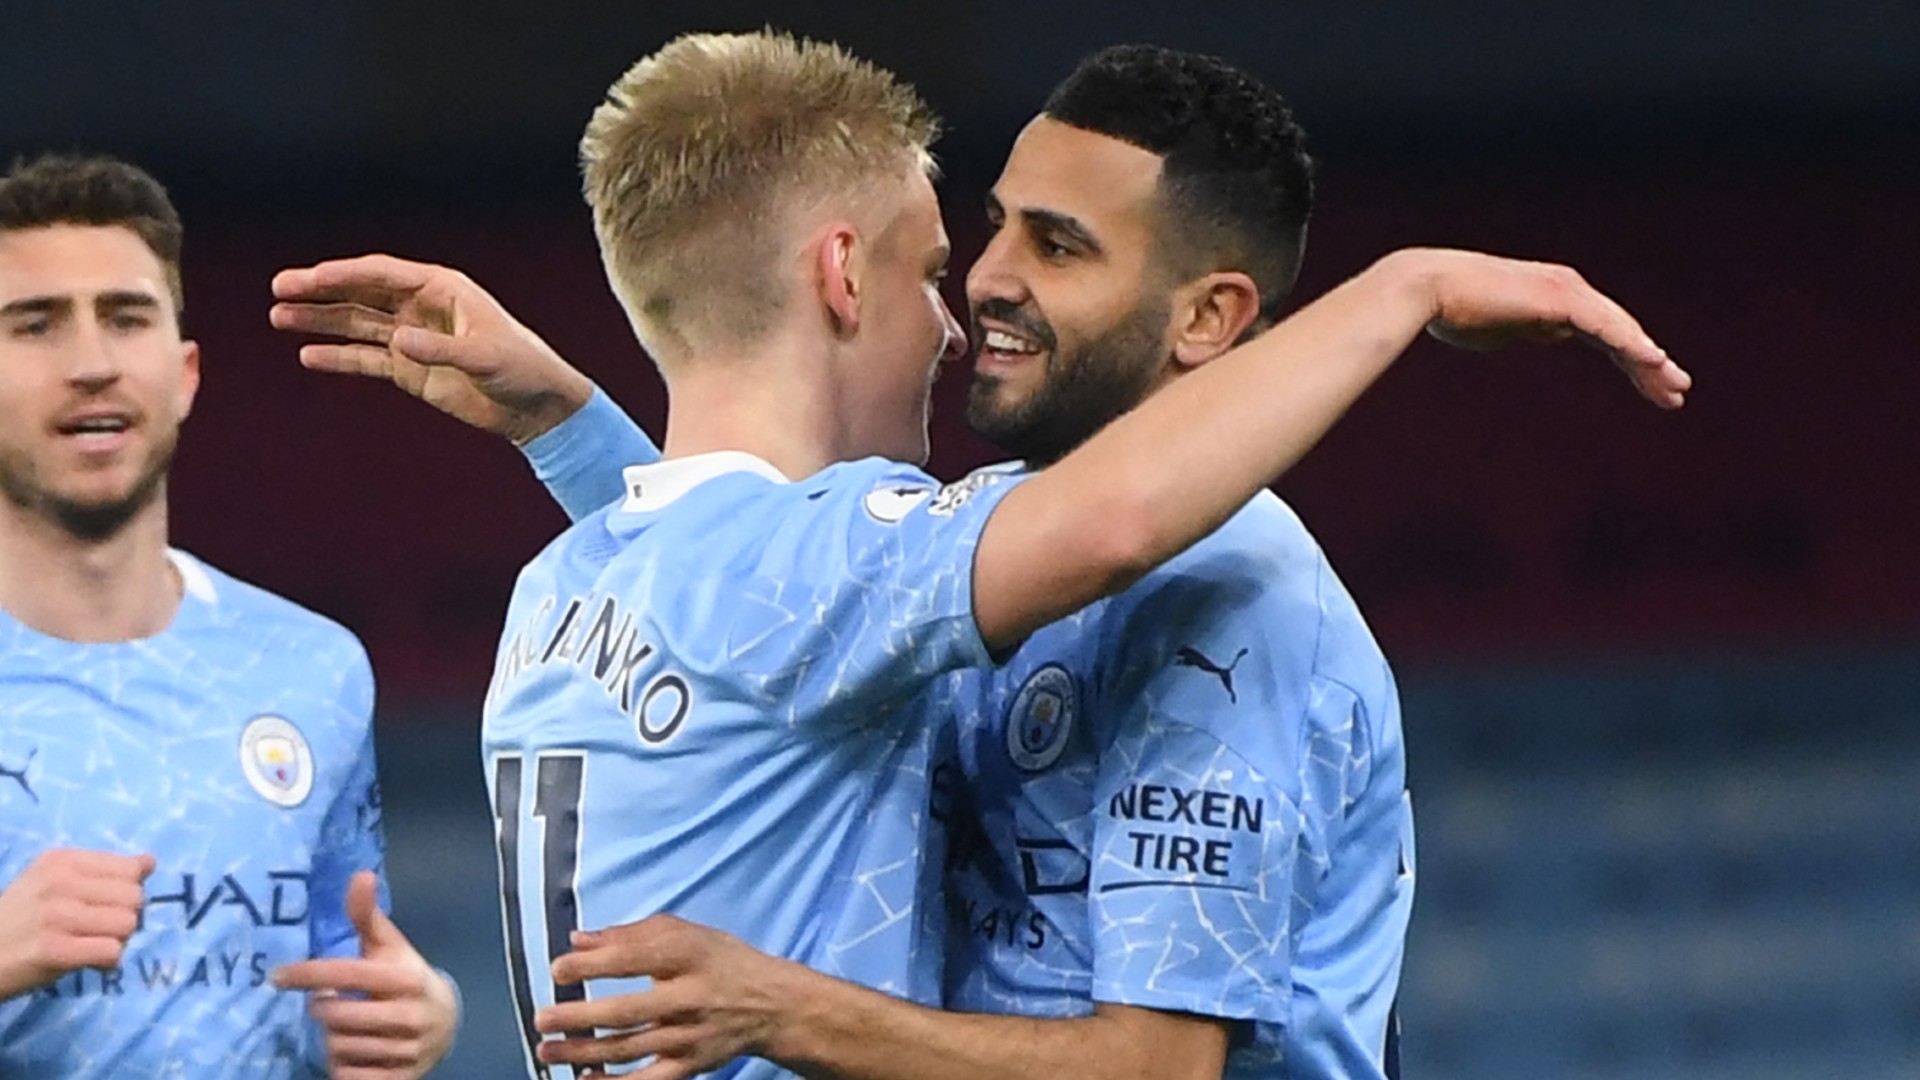 Champions League: Stats suggest Mahrez is Manchester City’s key attacking player